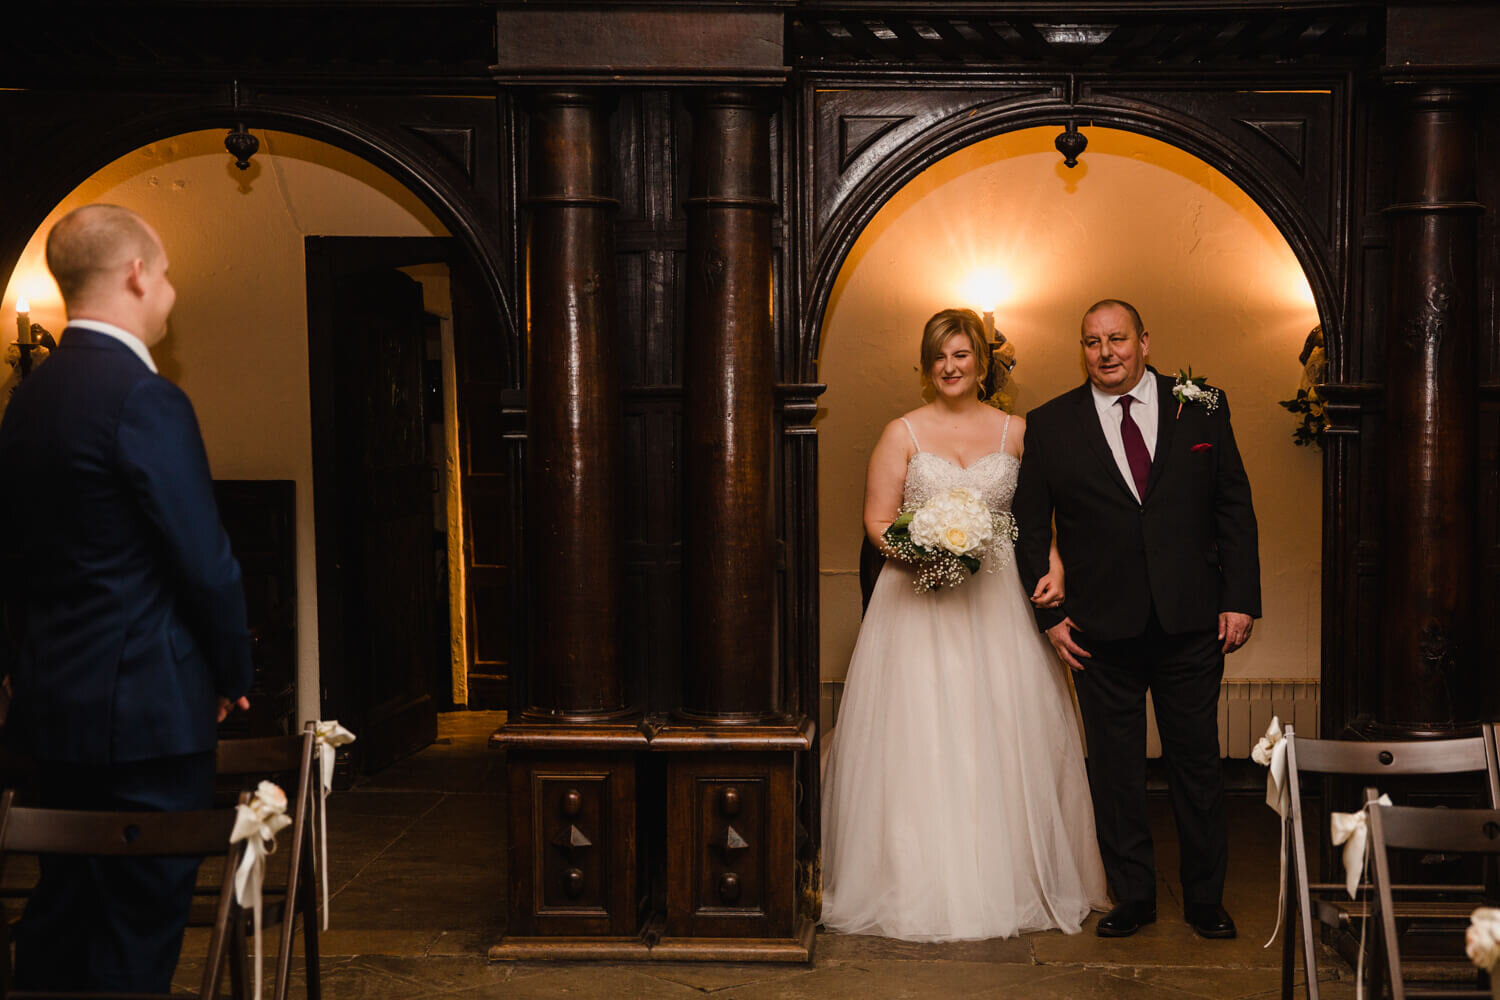 bride and father enter ceremony room together for service to commence